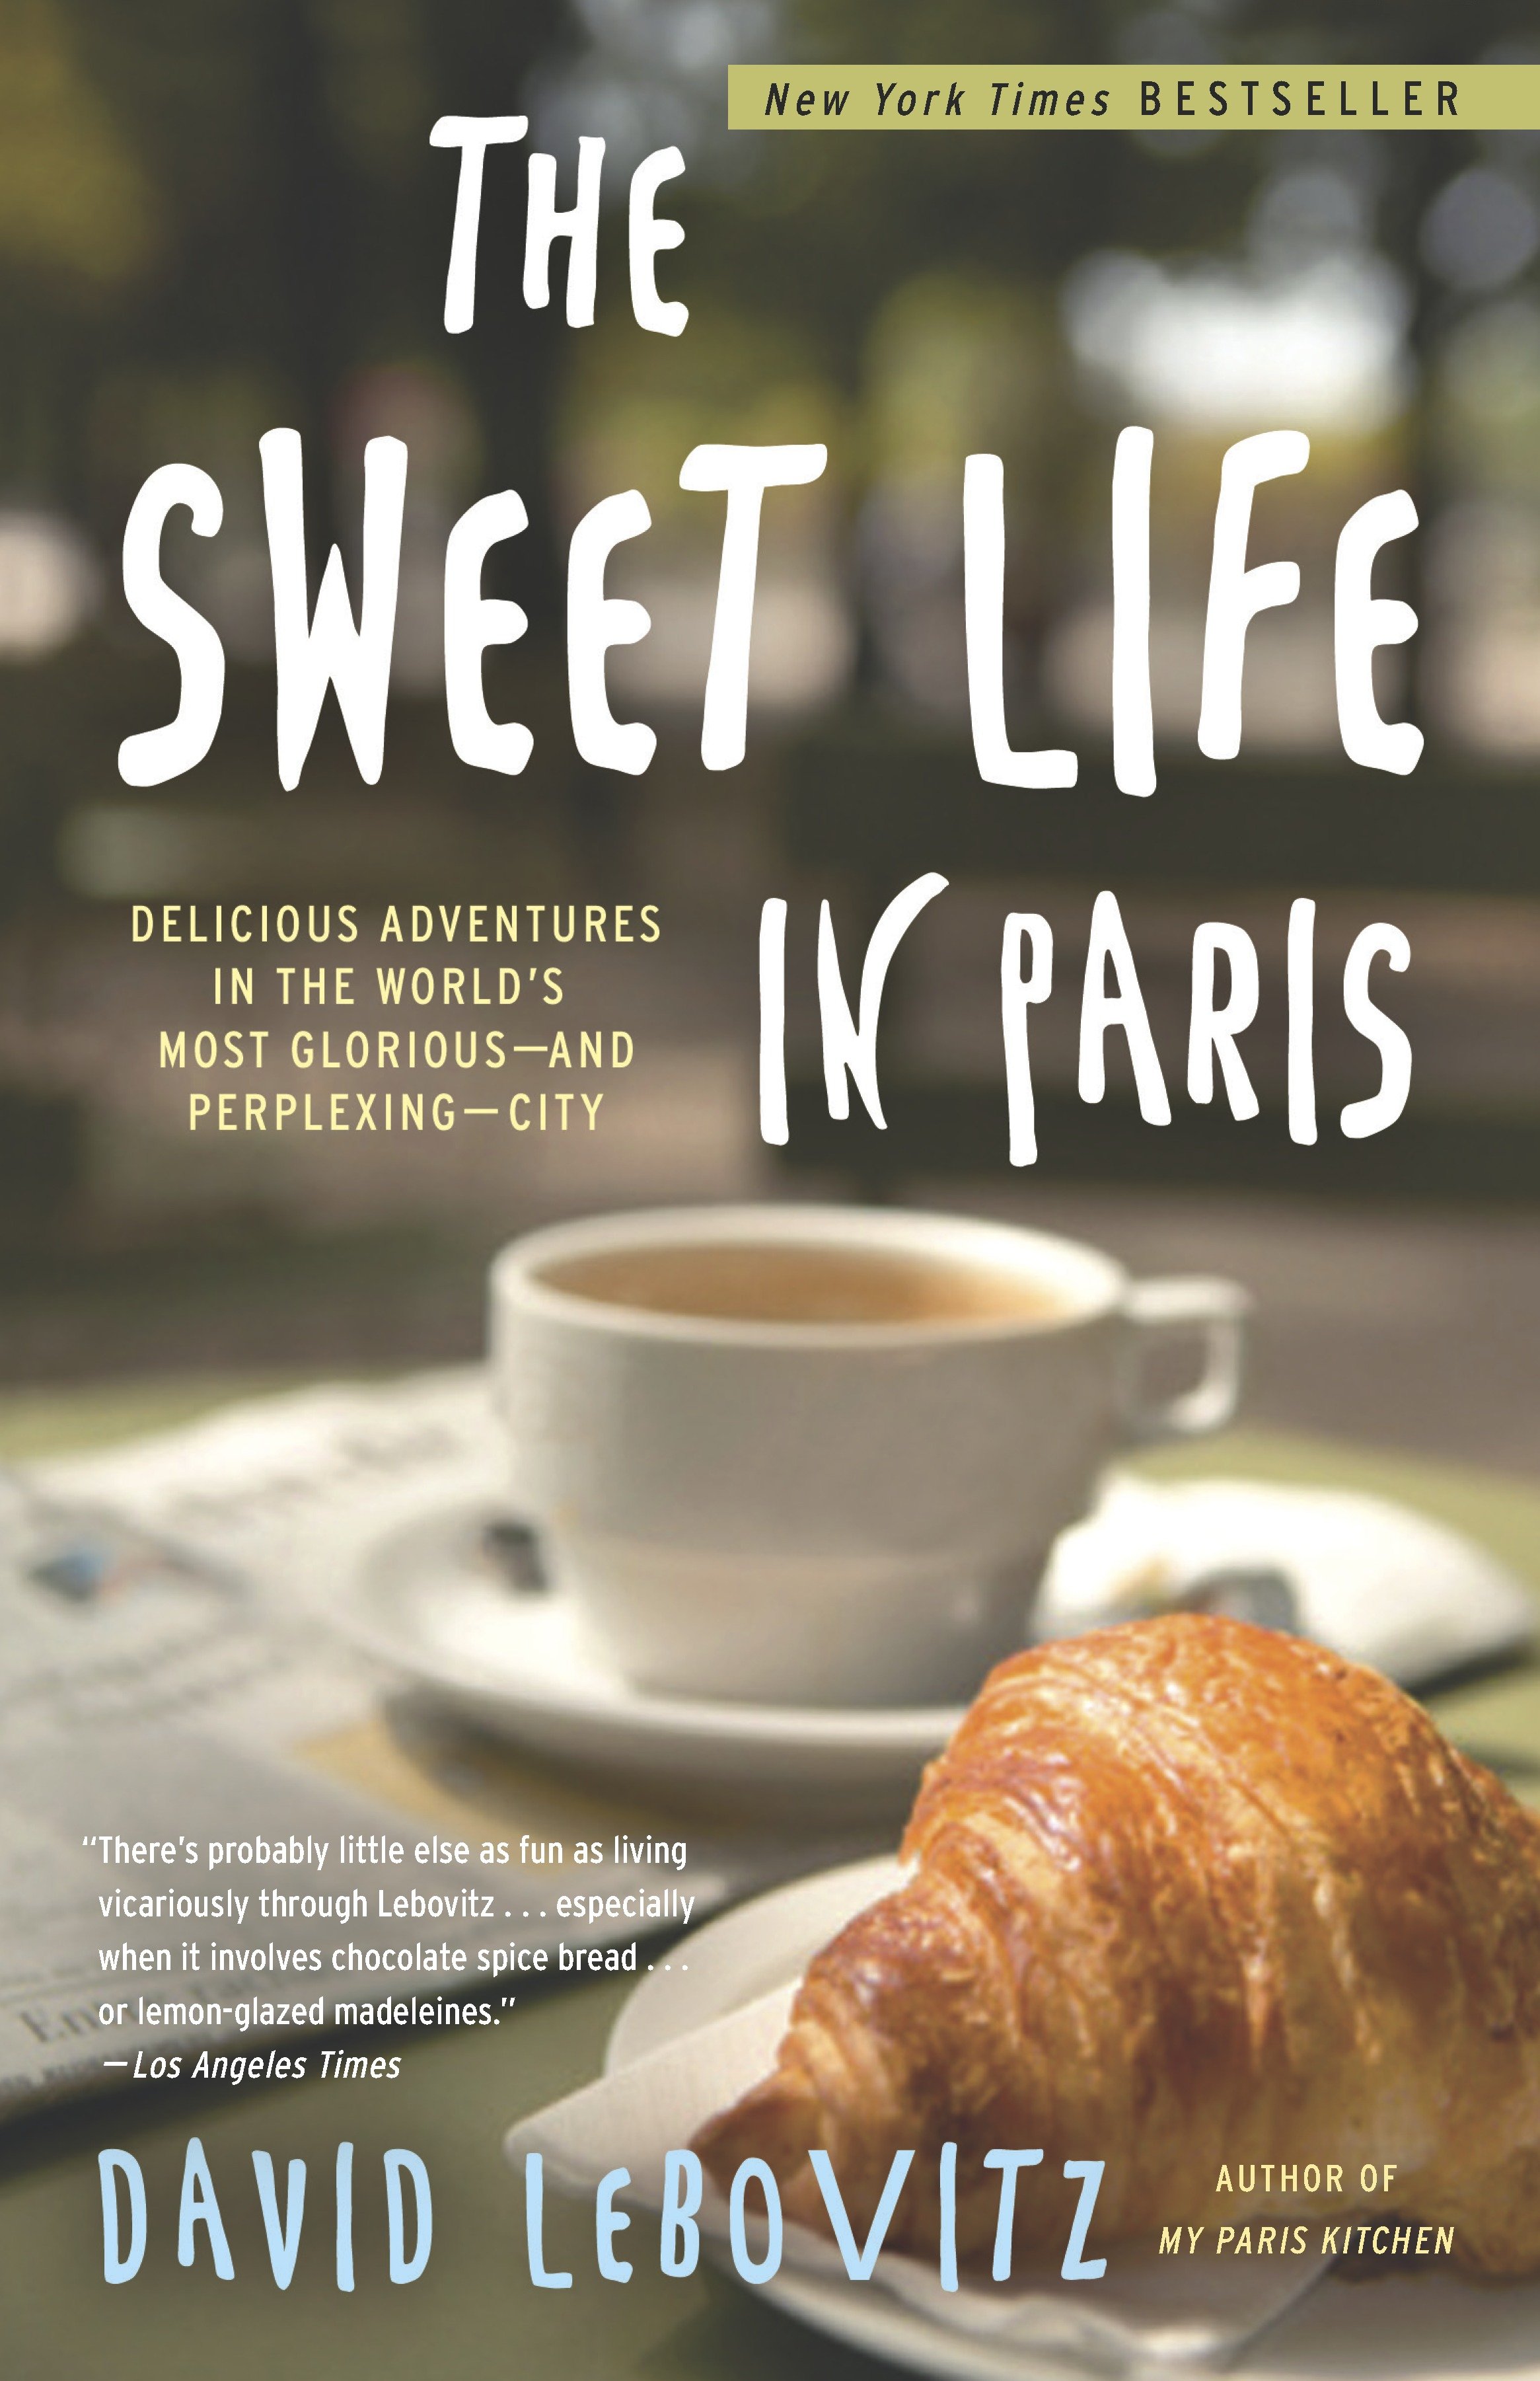 The sweet life in Paris delicious adventures in the world's most glorious -- and perplexing -- city cover image